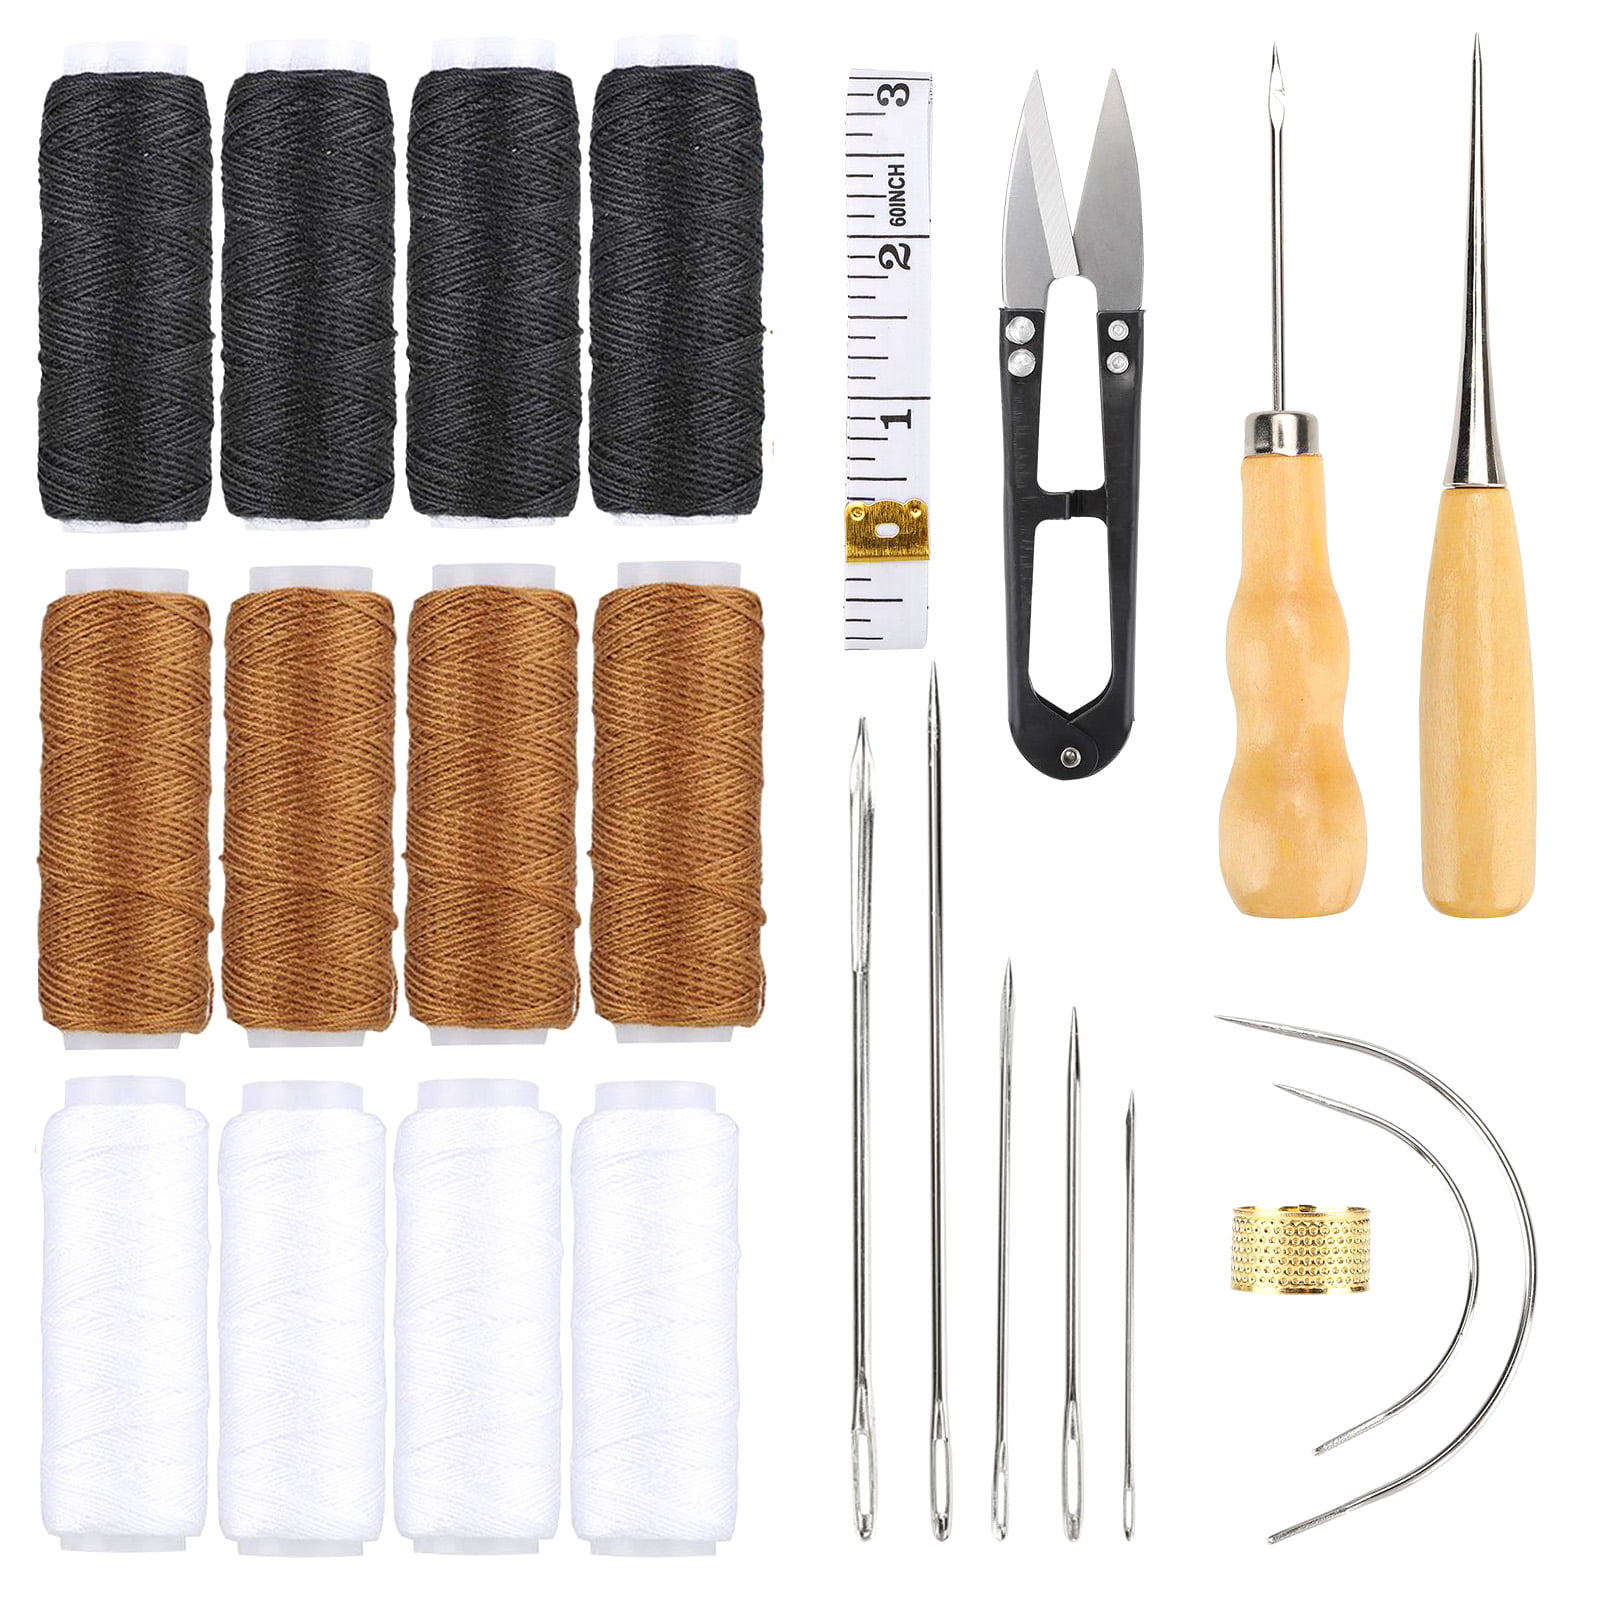 Leather Repair Tools Sewing Drilling Wood Waxed Thread Craft Set Awl Needles